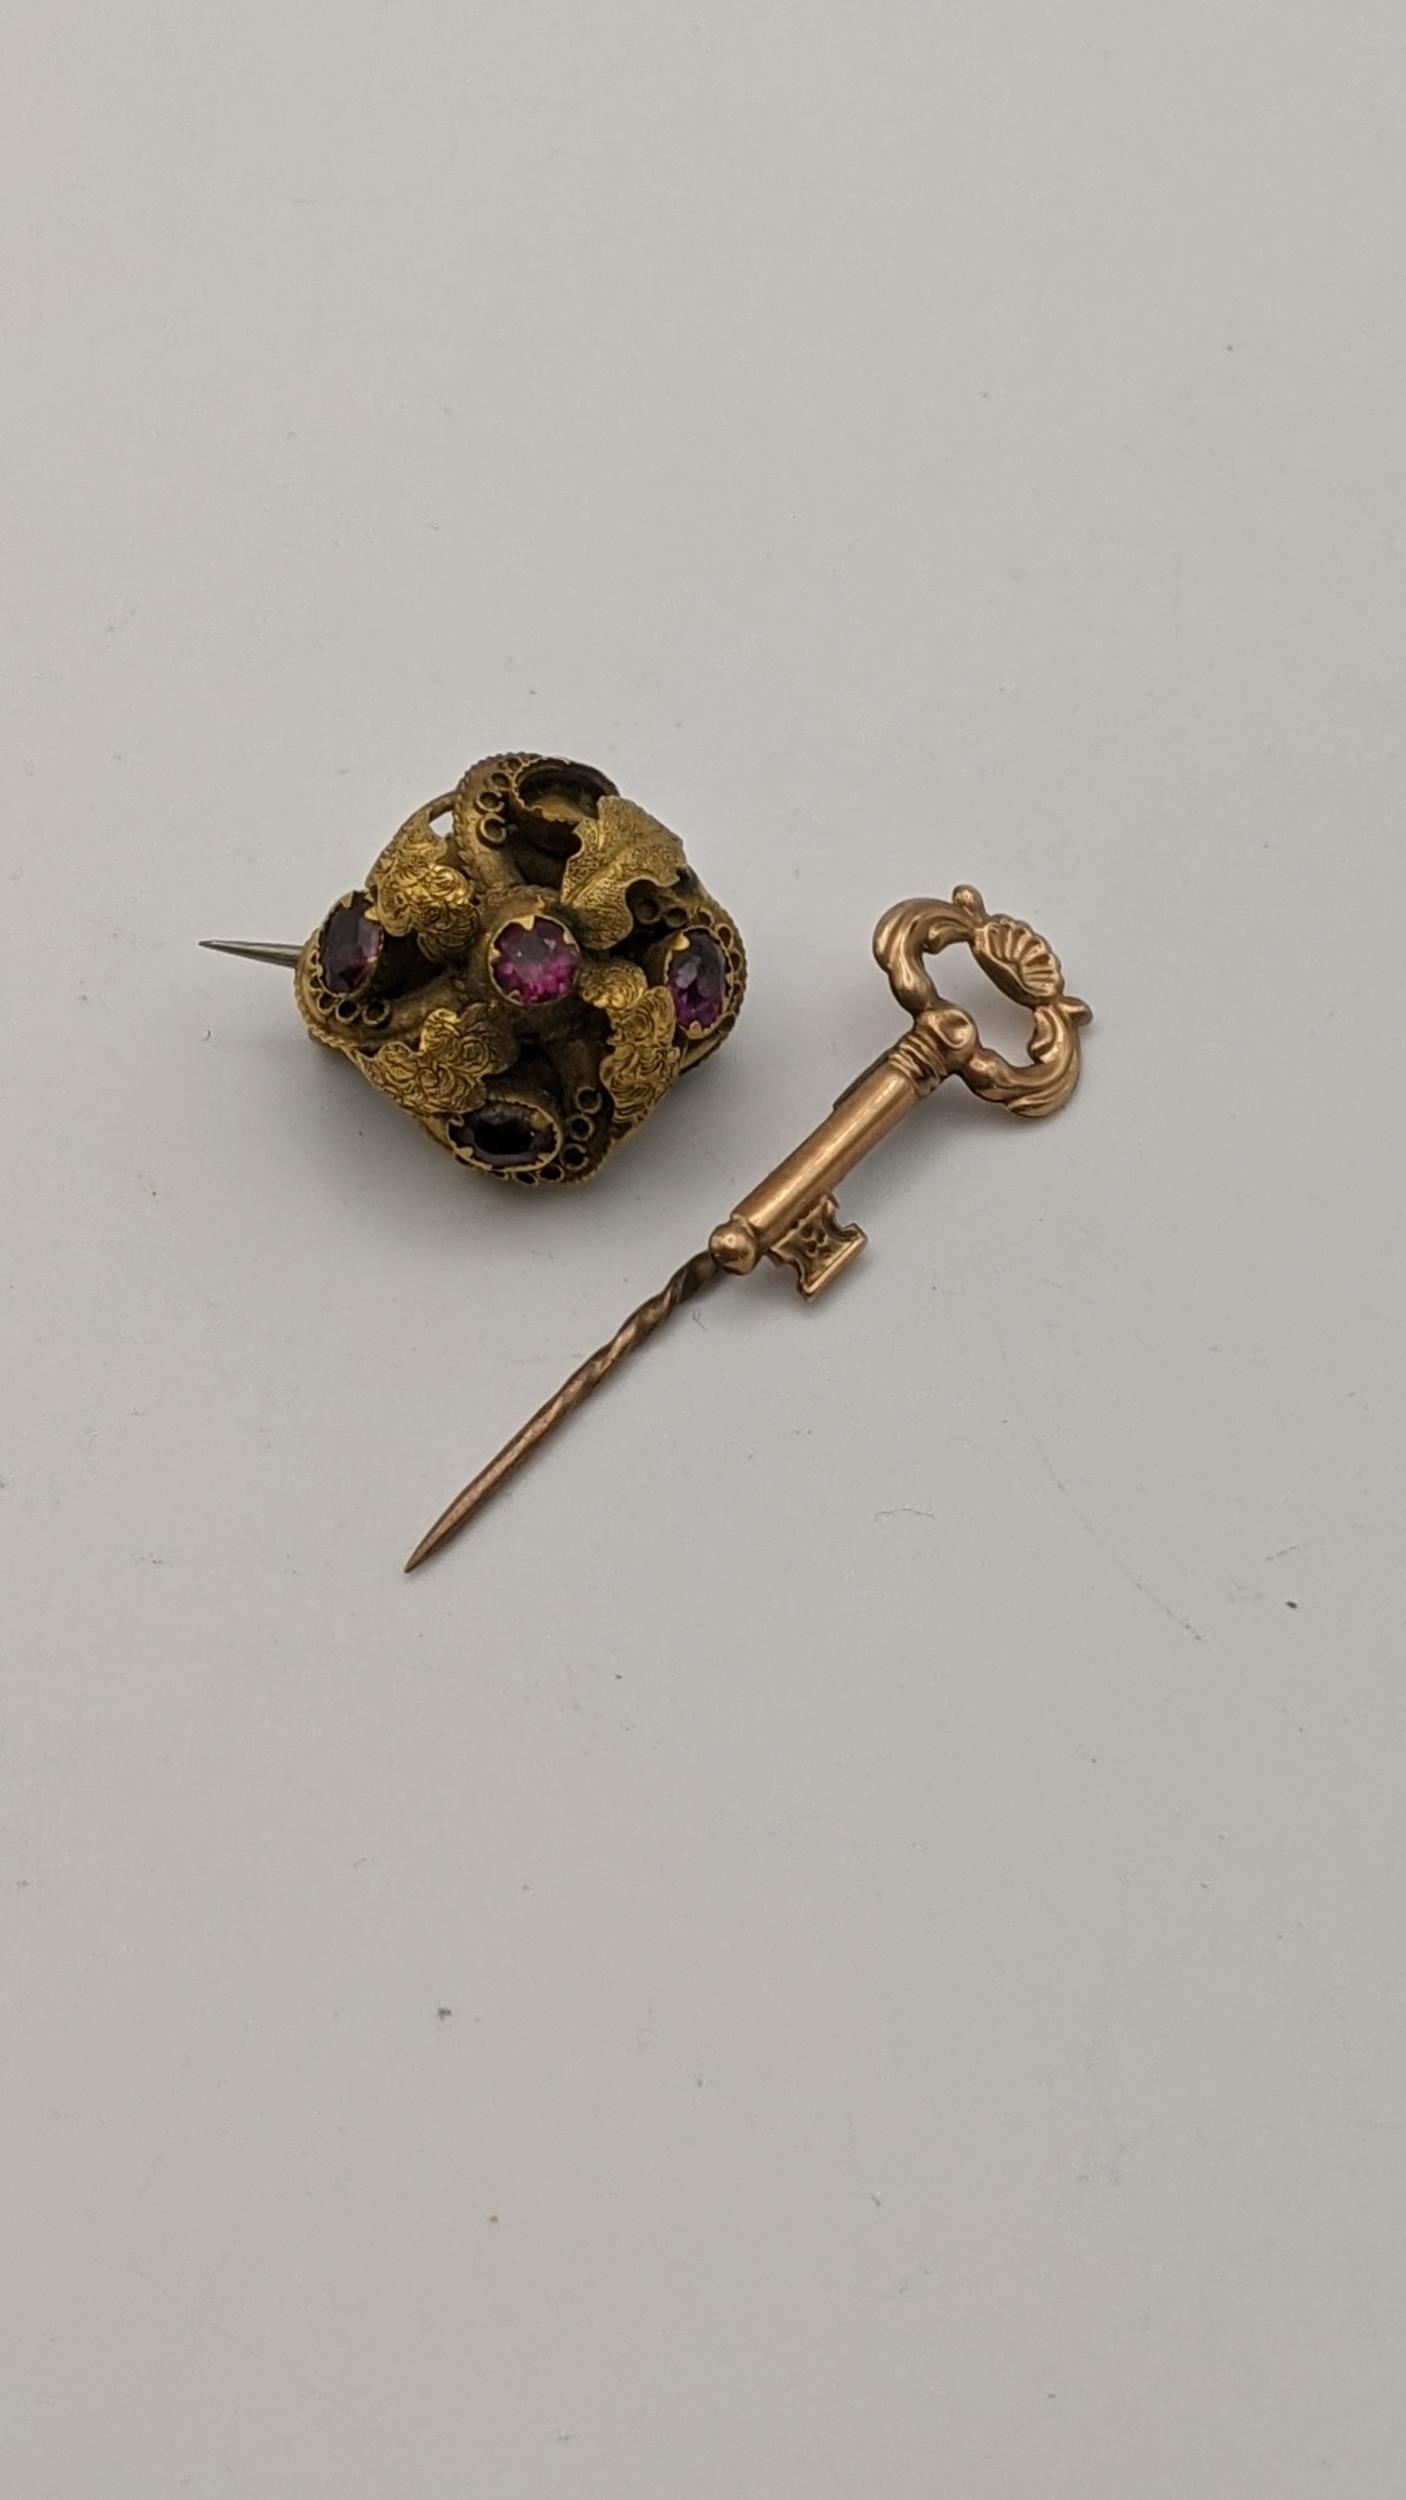 A Victorian yellow metal brooch set with amethyst coloured stones, along with a yellow metal stick